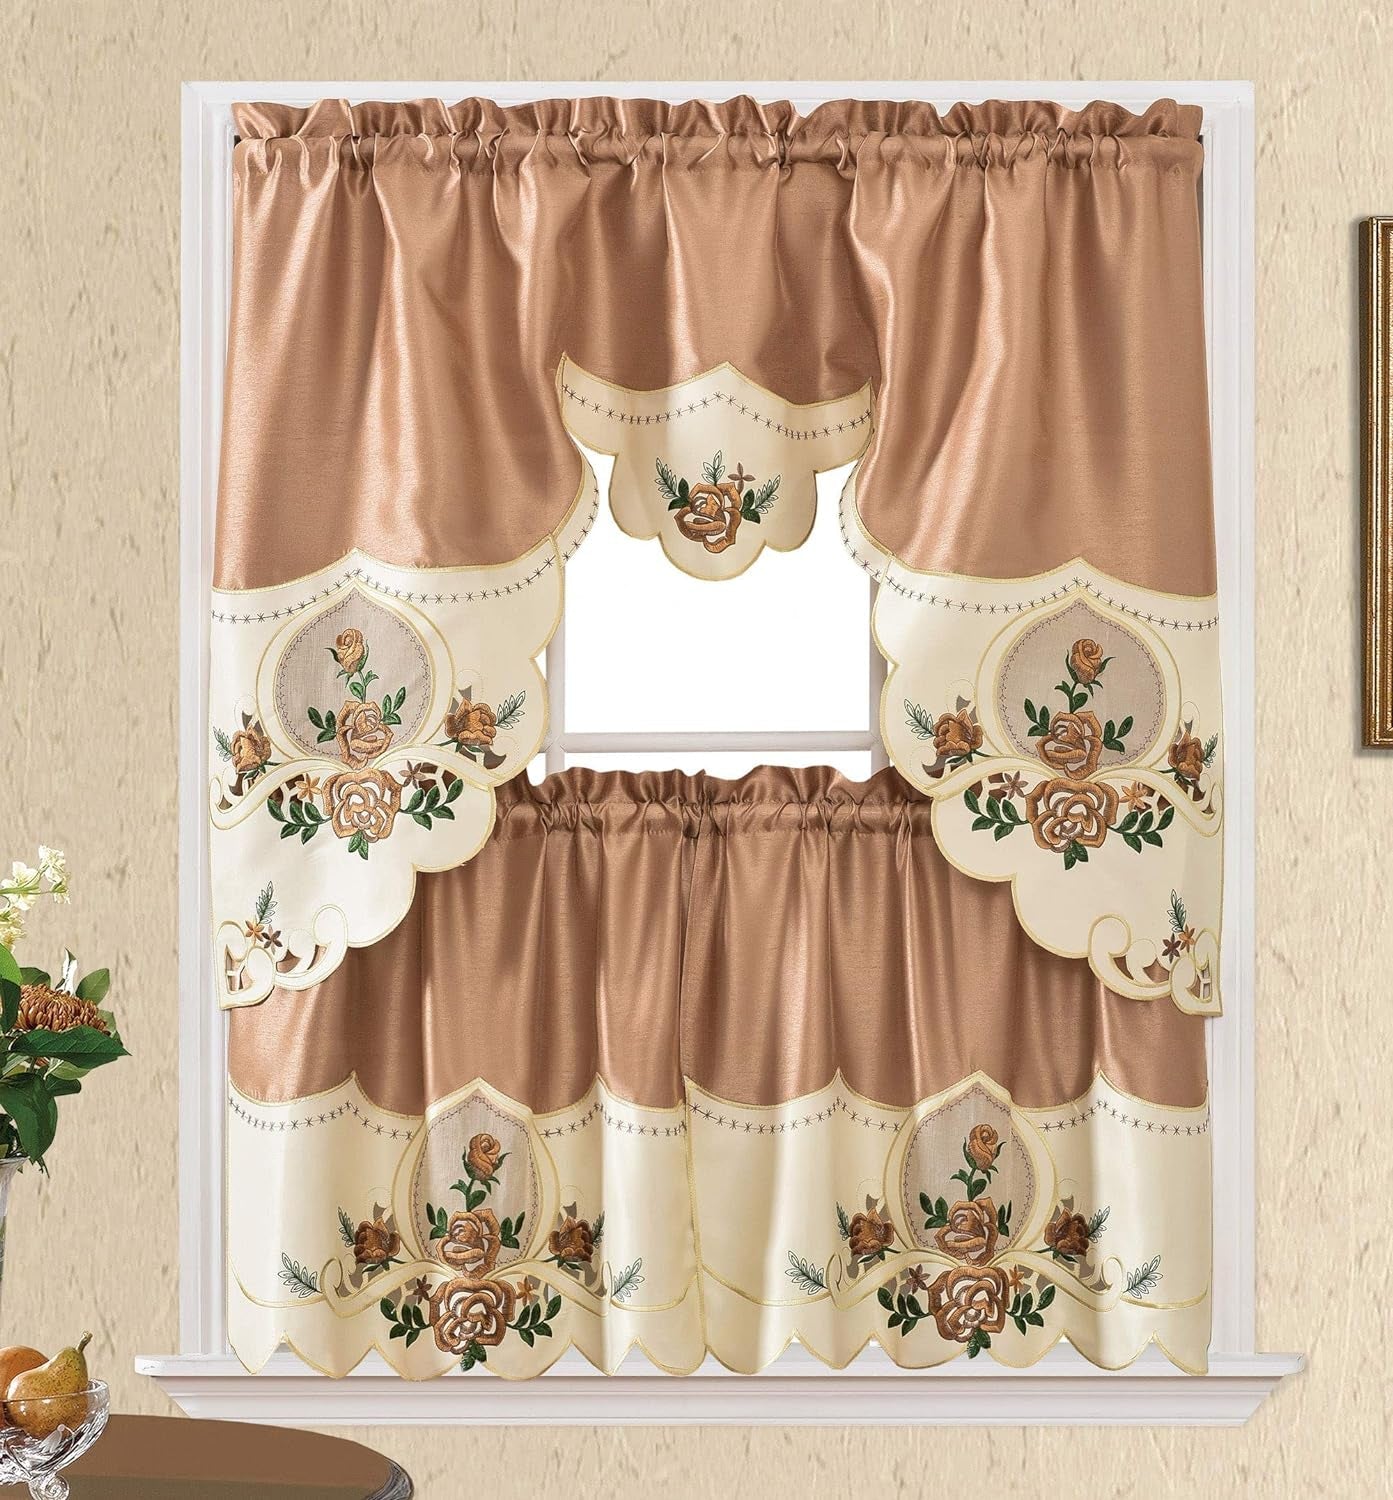 GOHD GOLDEN OCEAN HOME DECOR Rose Melody. 3Pcs Kitchen Cafe Curtain Set. Swag and 24 Inches Tiers Set for Small Windows. Nice Matching Color Rose Embroidery on Border and Inserted Organza. (Yellow)